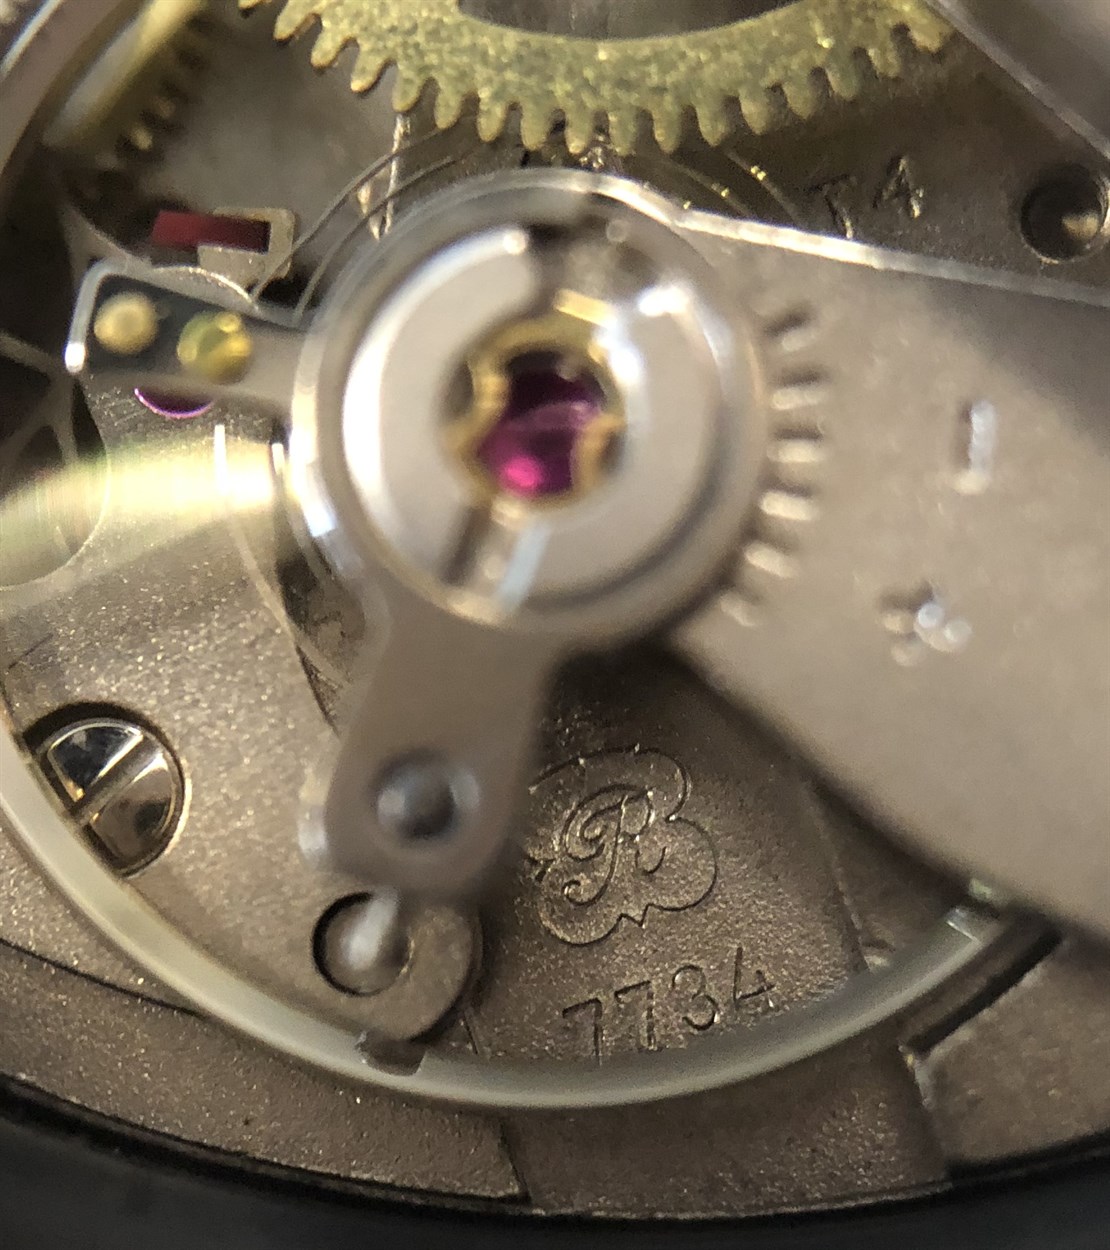 Heuer - A gentleman's rare PVD coated stainless steel chronograph watch head, - Image 7 of 7